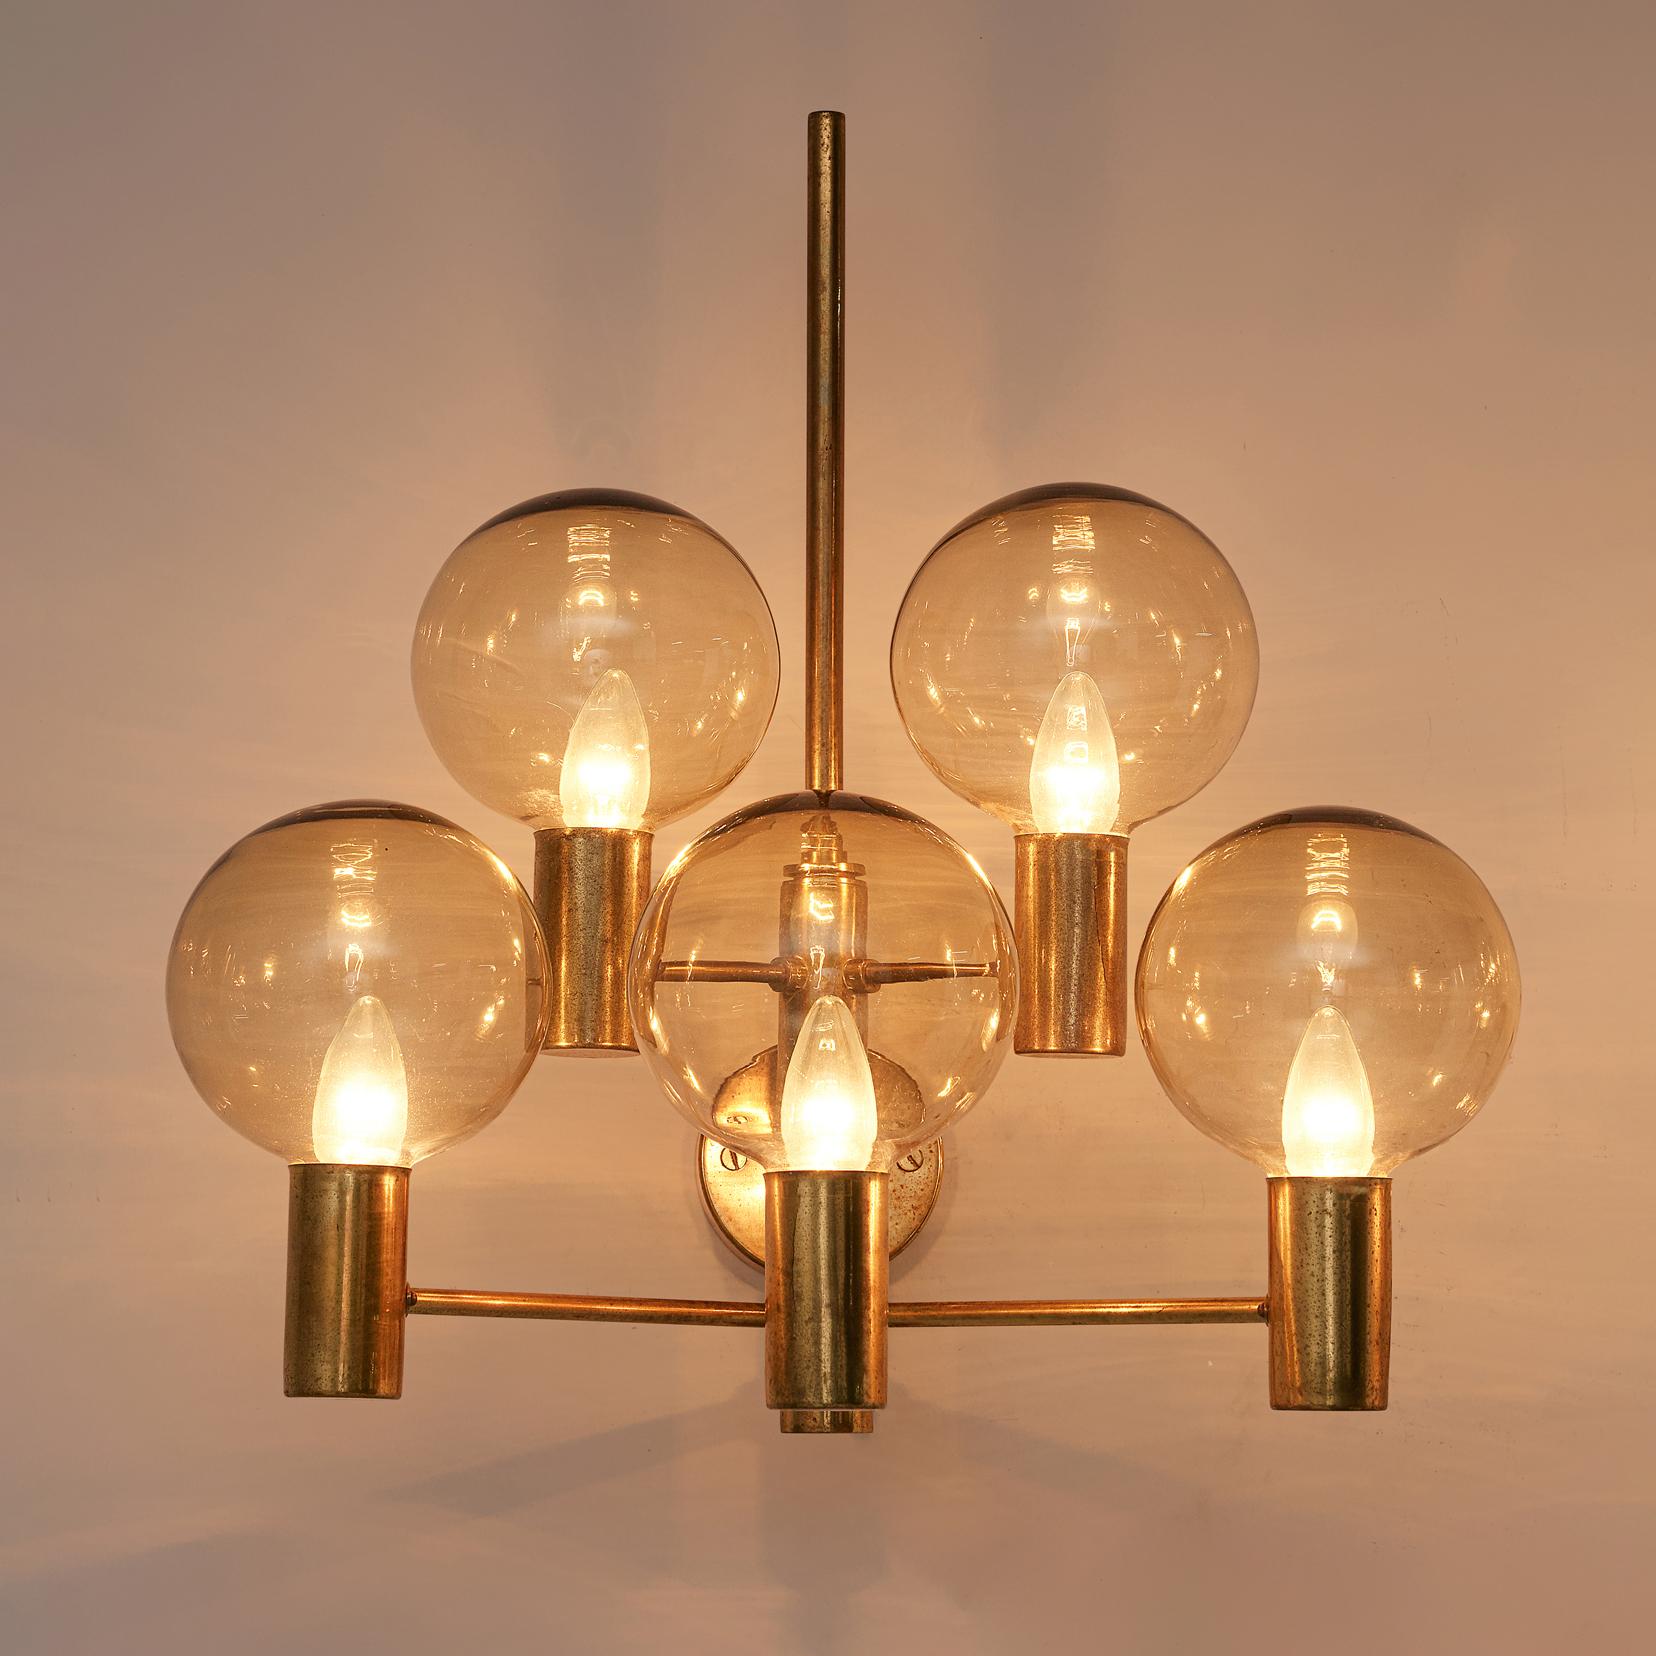 Hans-Agne Jakobsson for Hans-Agne Jakobsson AB in Markaryd, wall light, brass, glass, Sweden, 1960s.

A large wall light in patinated brass with clear glass shades by Hans-Agne Jakobsson. Divided over five arms, this light creates a stunning light